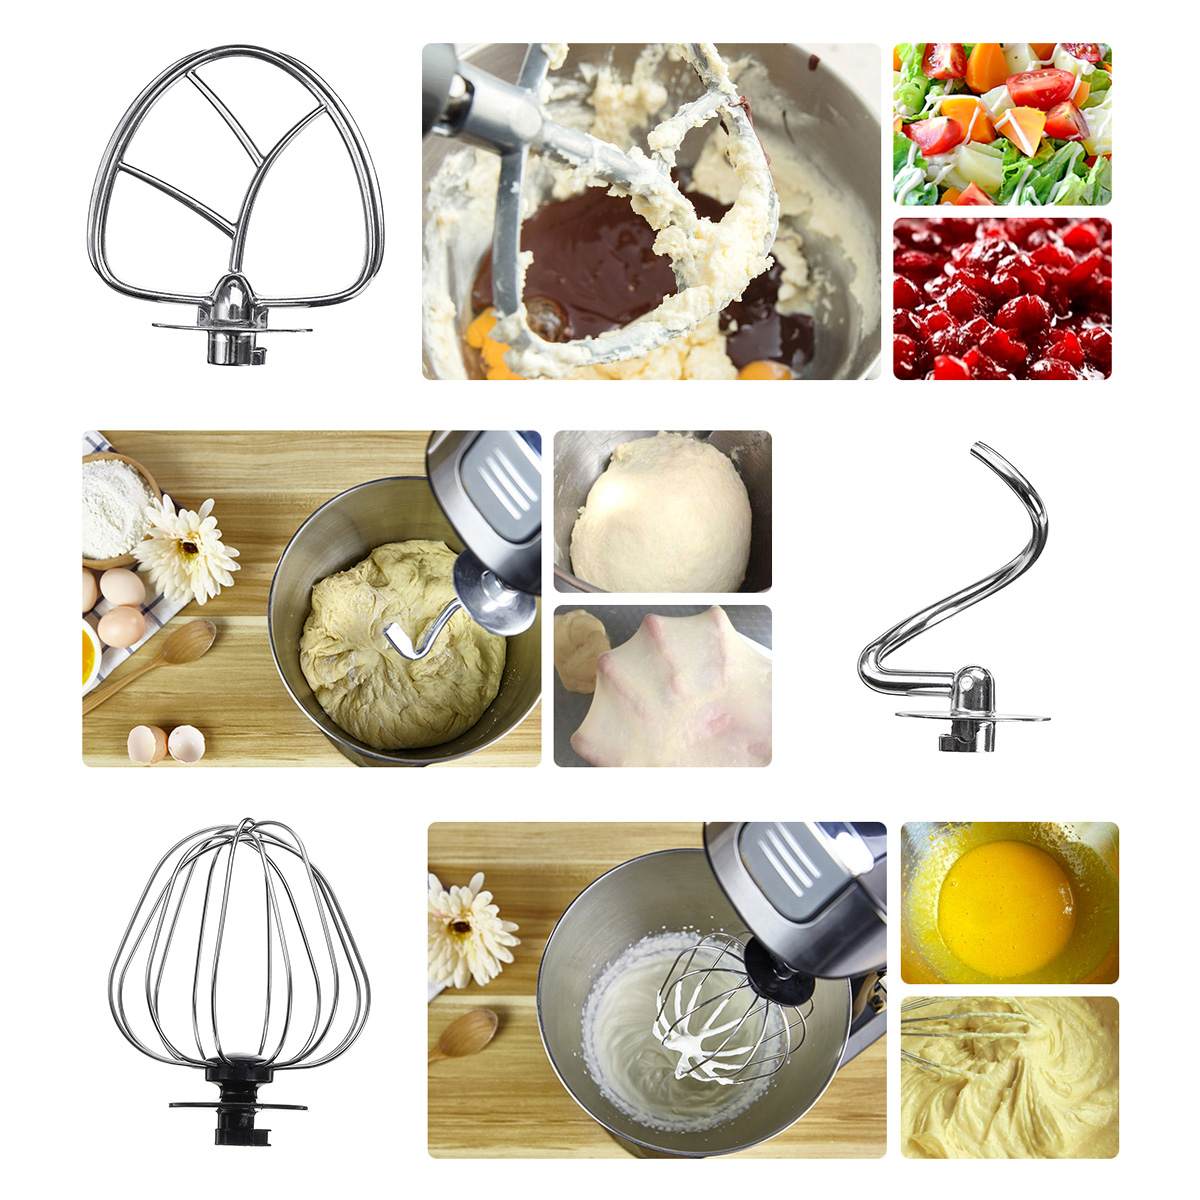 Stand Mixer 6 Speed Multifunctional Electric Food blender Mixer 1000W Meat Grinder Food Processor Doughs Beater Kitchen Tools